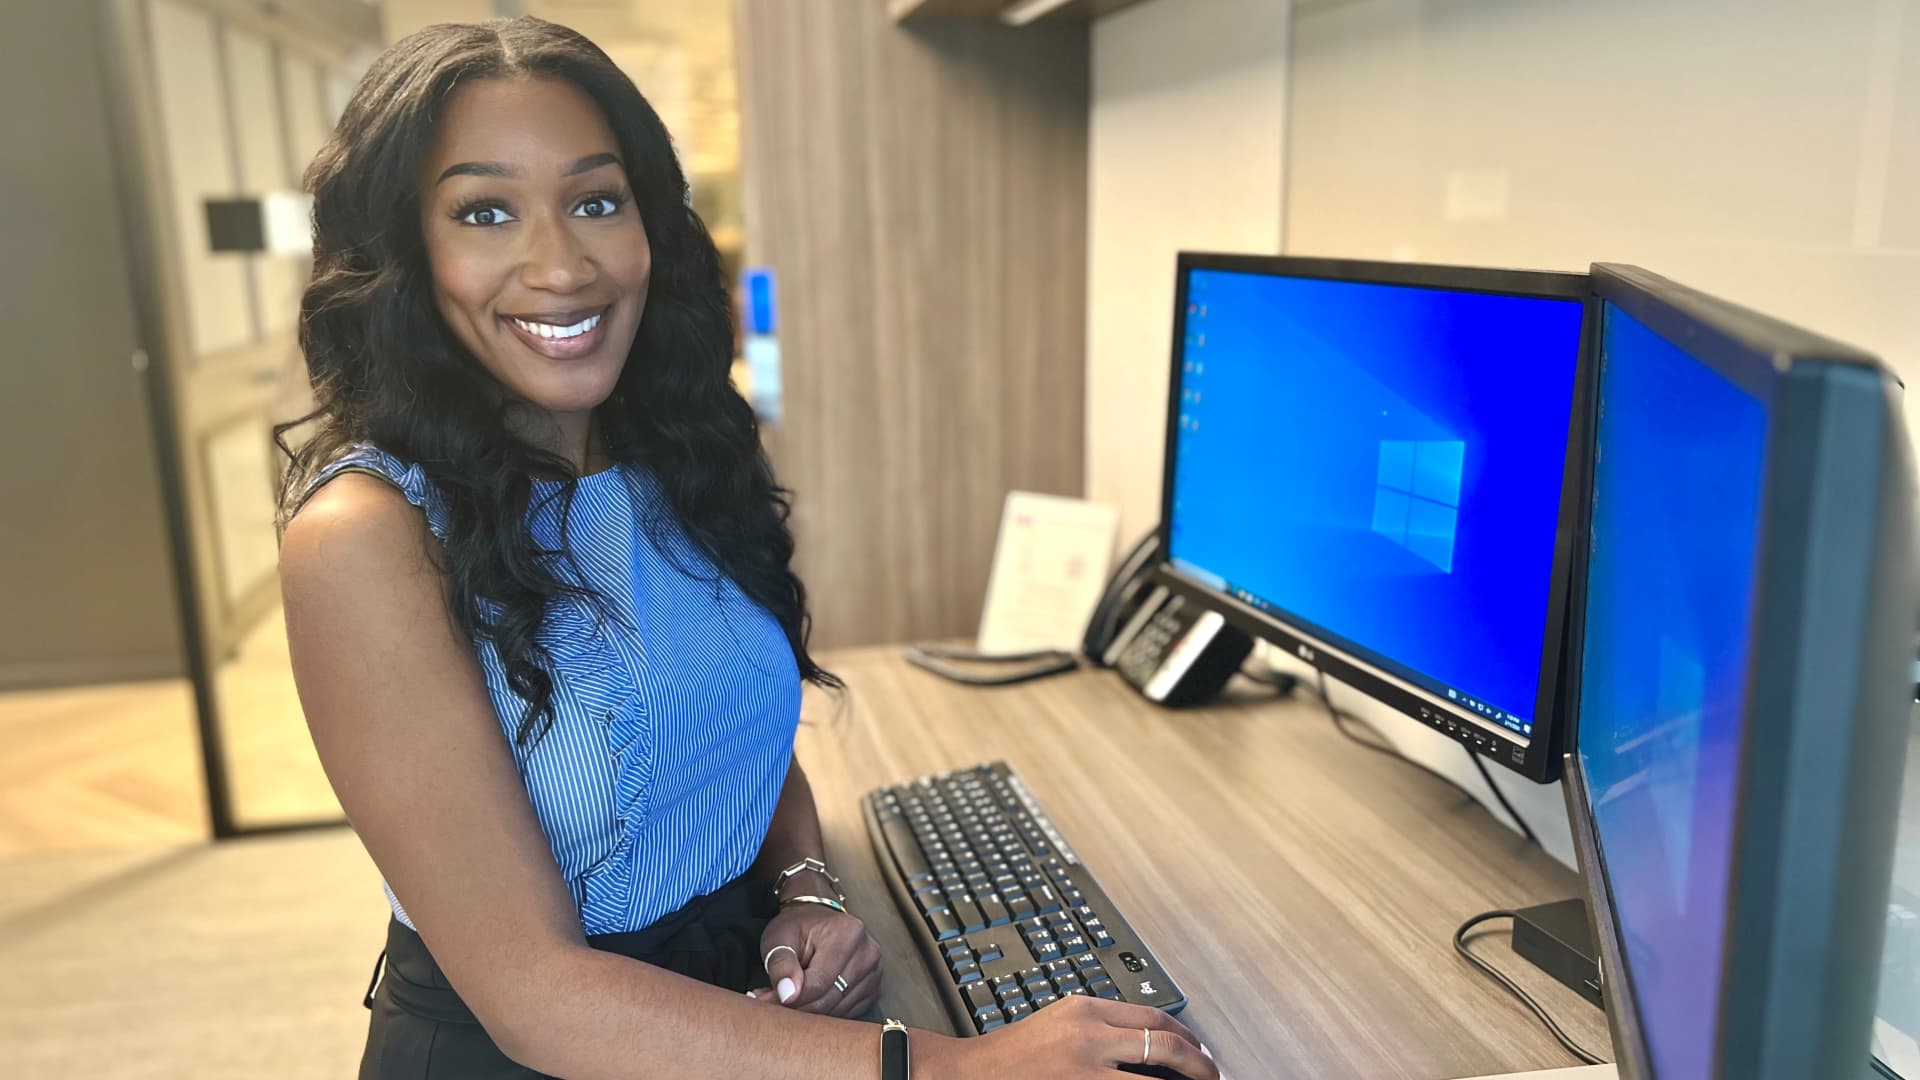 29-year-old was laid off from her hotel job in 2020—now she makes $125,000 working in tech, without a bachelor’s degree